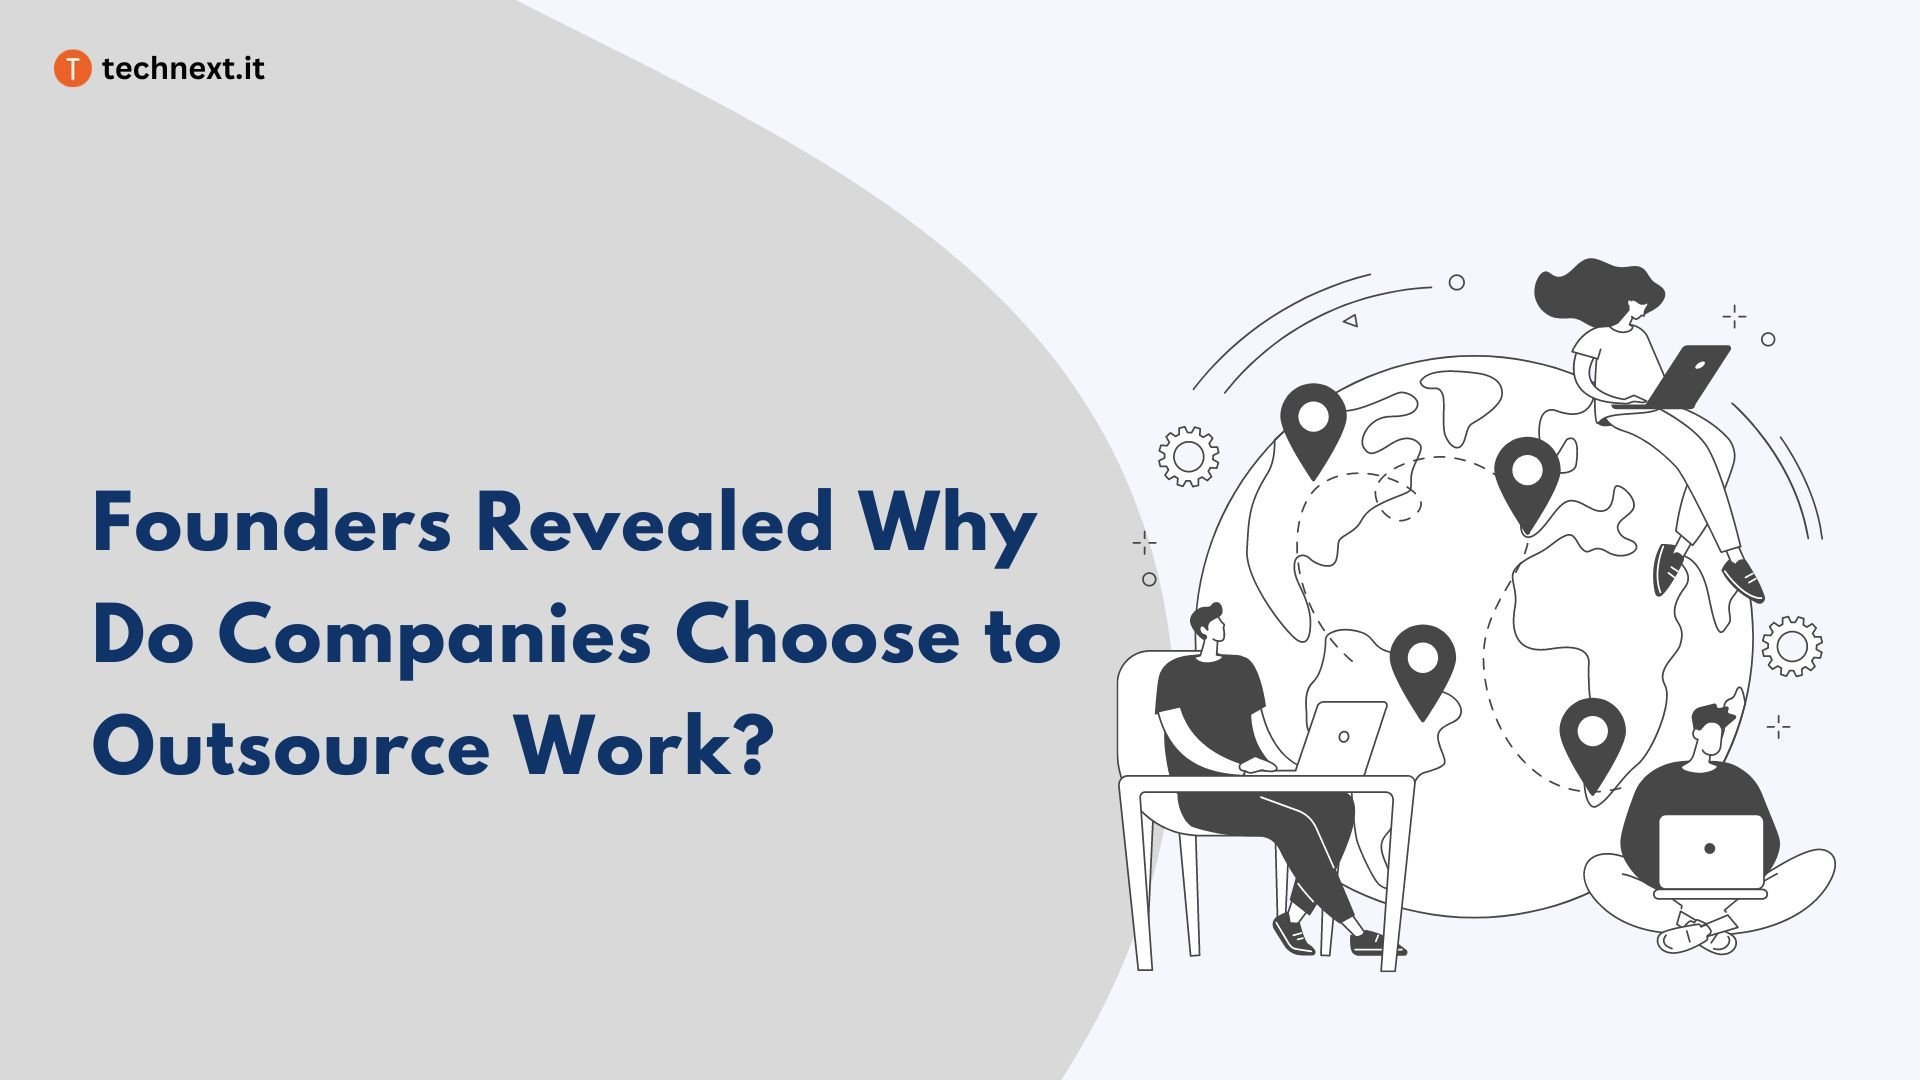 Founders Revealed Why Do Companies Choose to Outsource Work